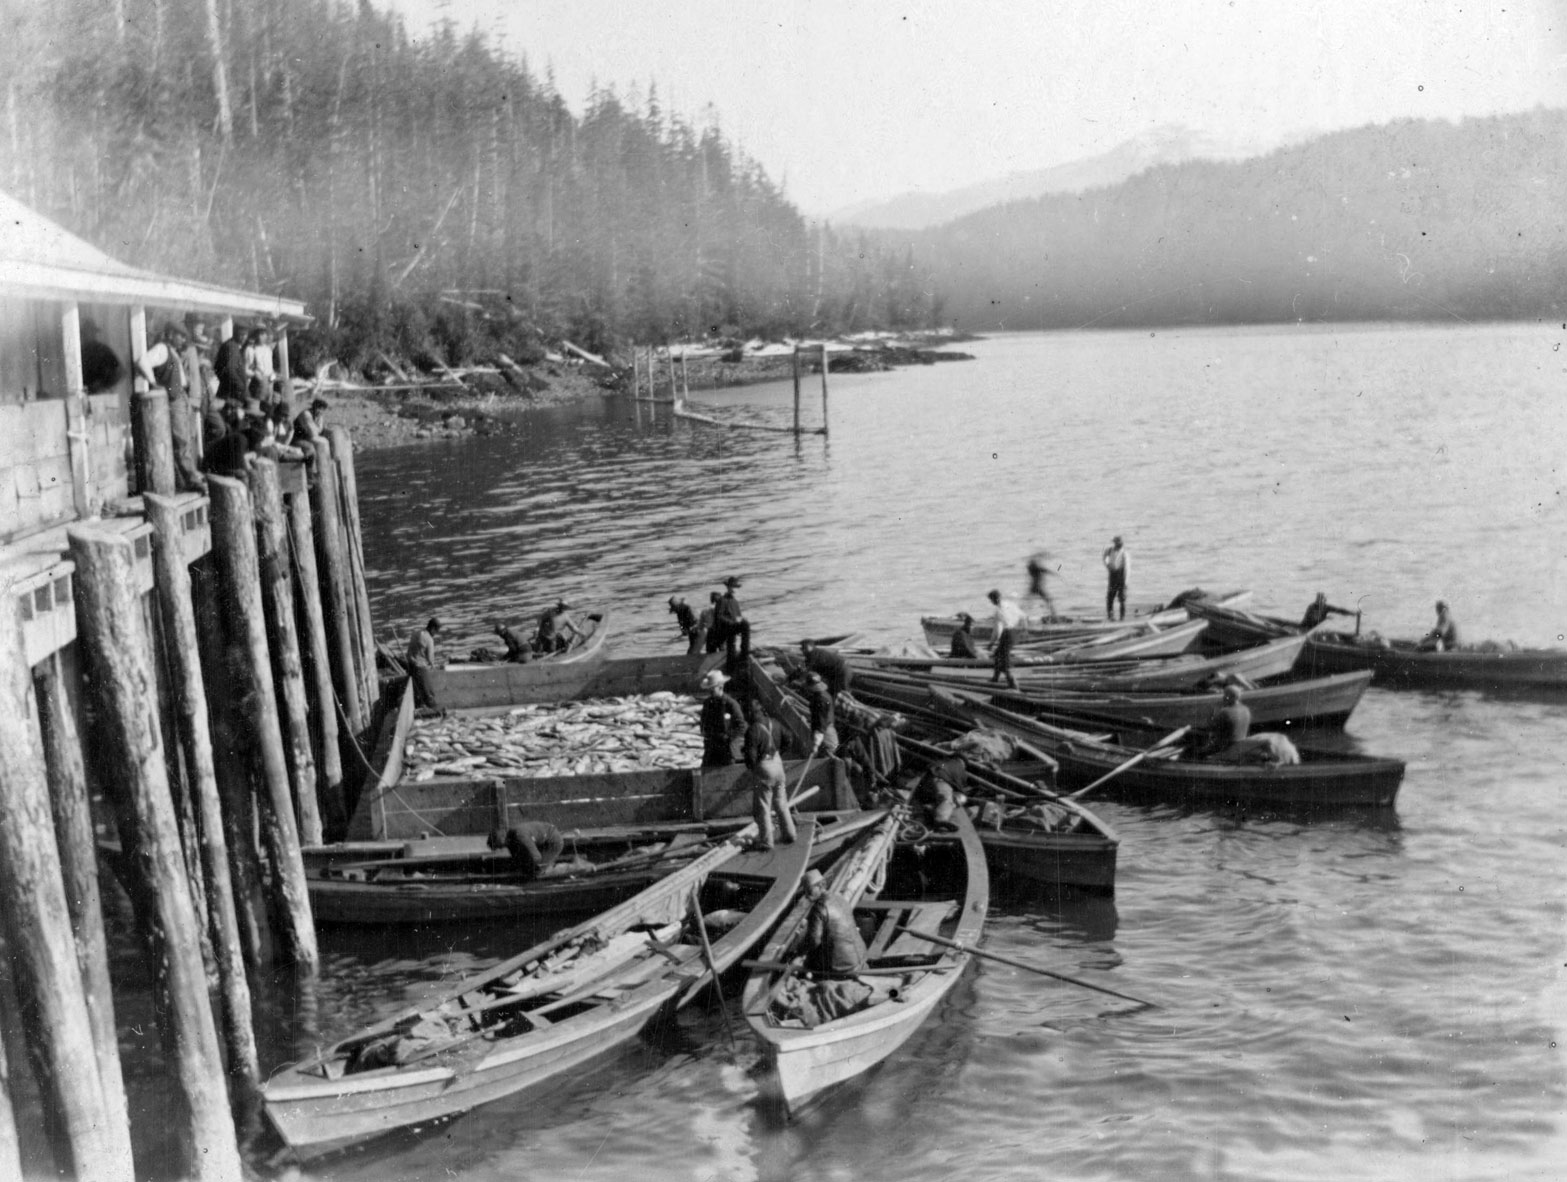 Ten skiffs with fishermen in them gather around a flat bottomed scow filled with fish next to the pilings of the cannery wharf.